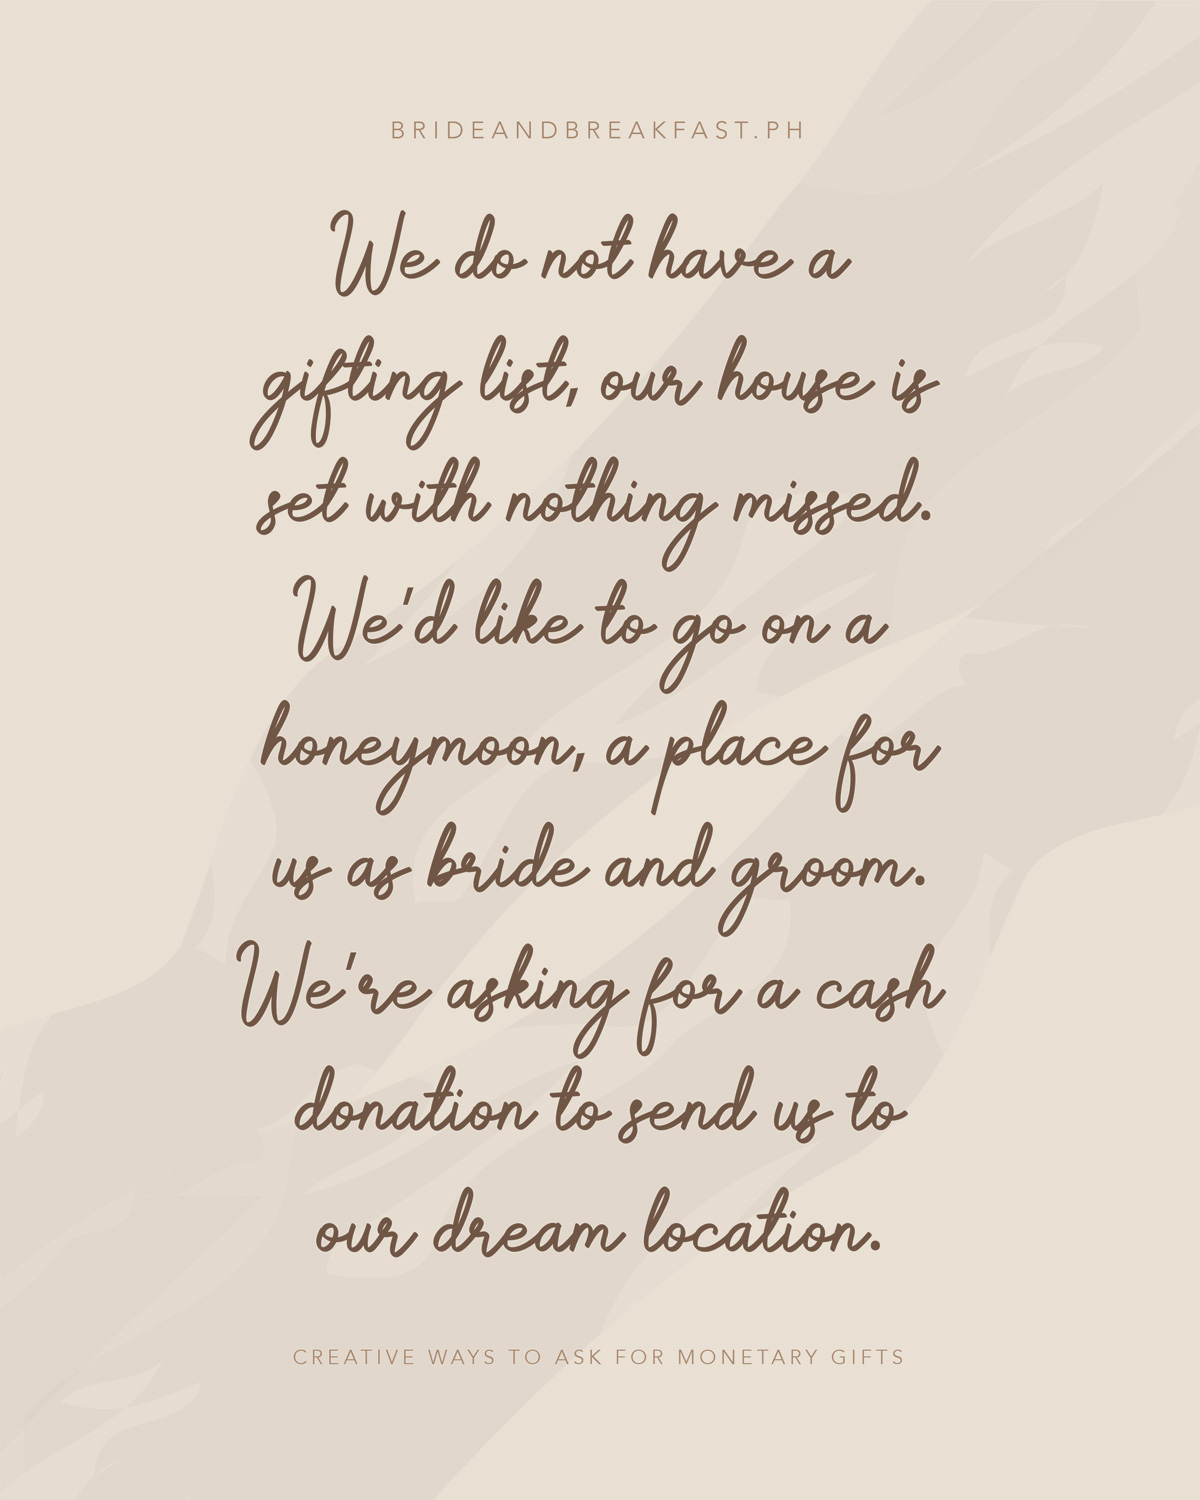 We do not have a gifting list, our house is set with nothing missed. We'd like to go on honeymoon a place for us as bride and groom. We're asking for a cash donation to send us to our dream location.